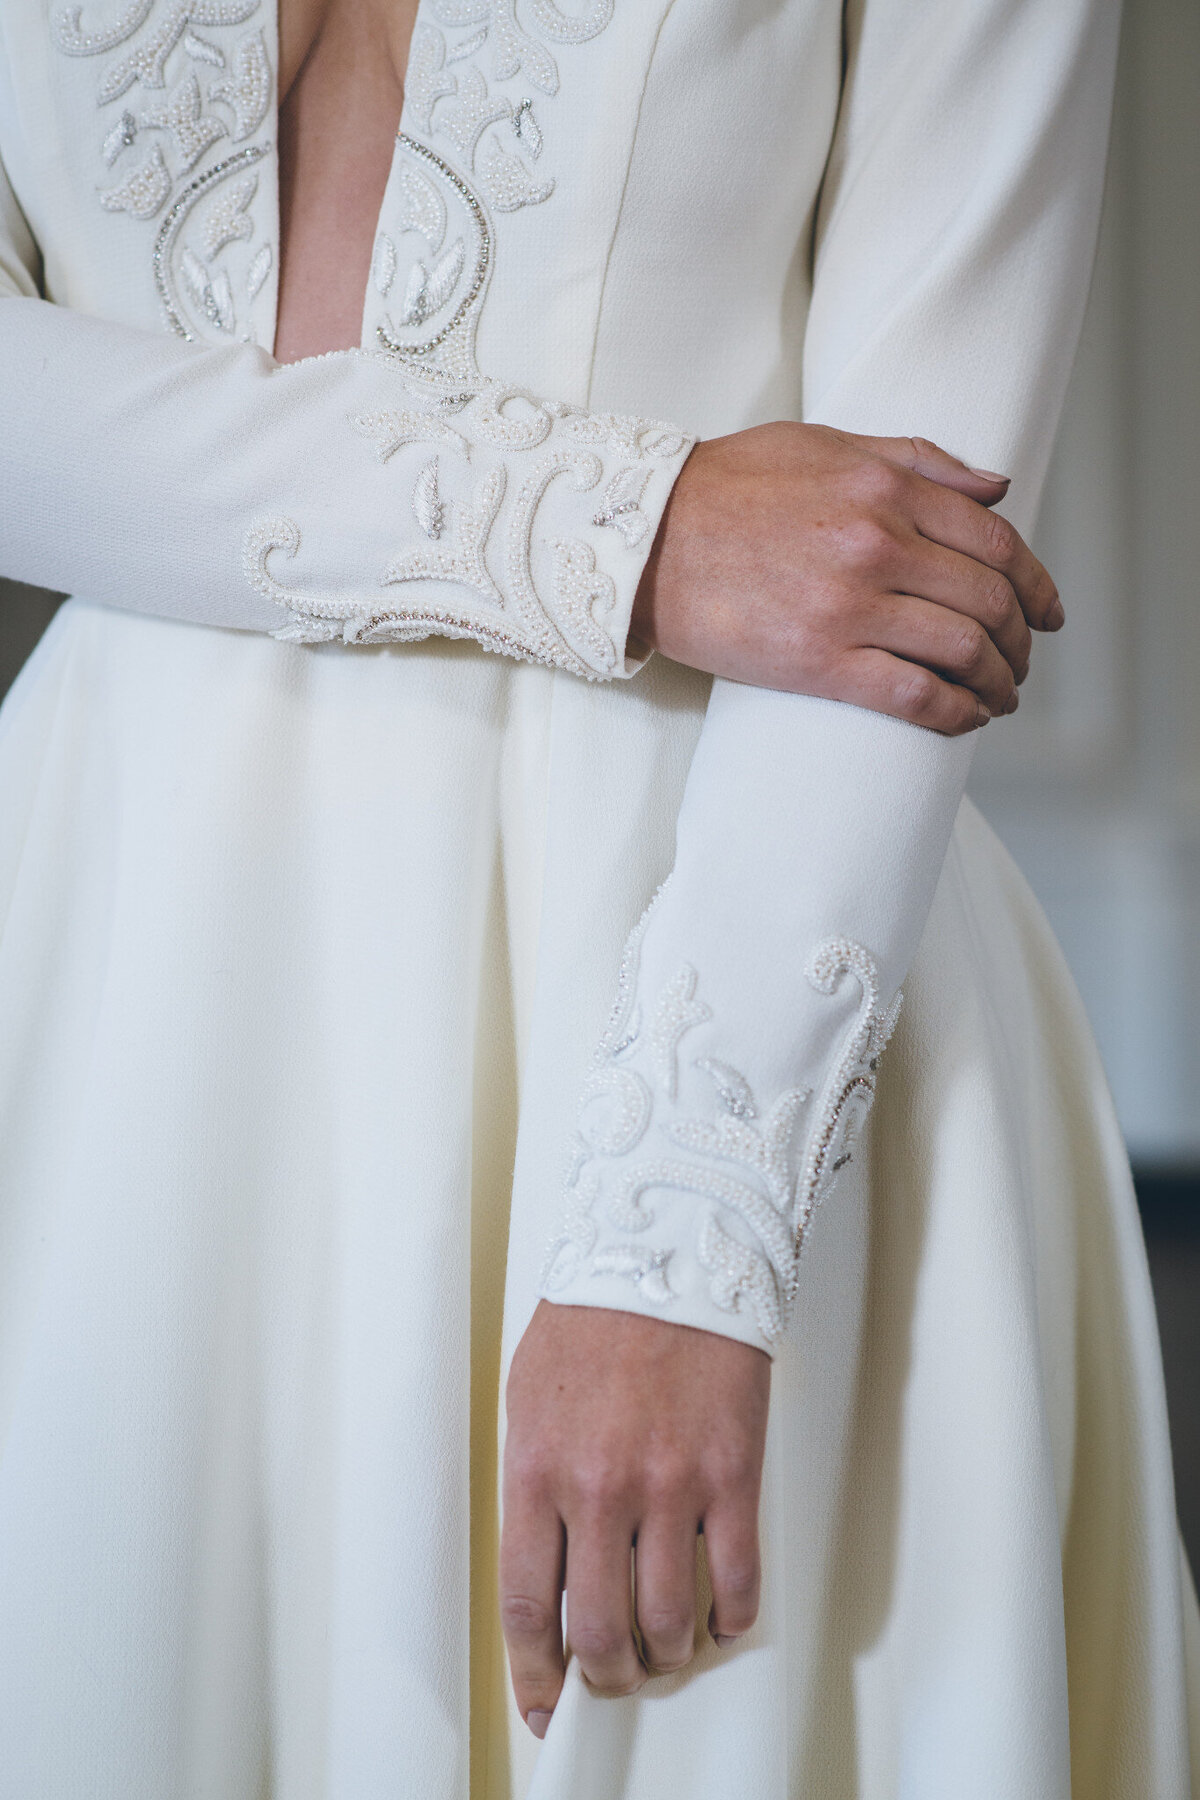 The same beaded embroidery motif of the neckline decorates the hem of the long sleeves on the Iman wedding dress style.